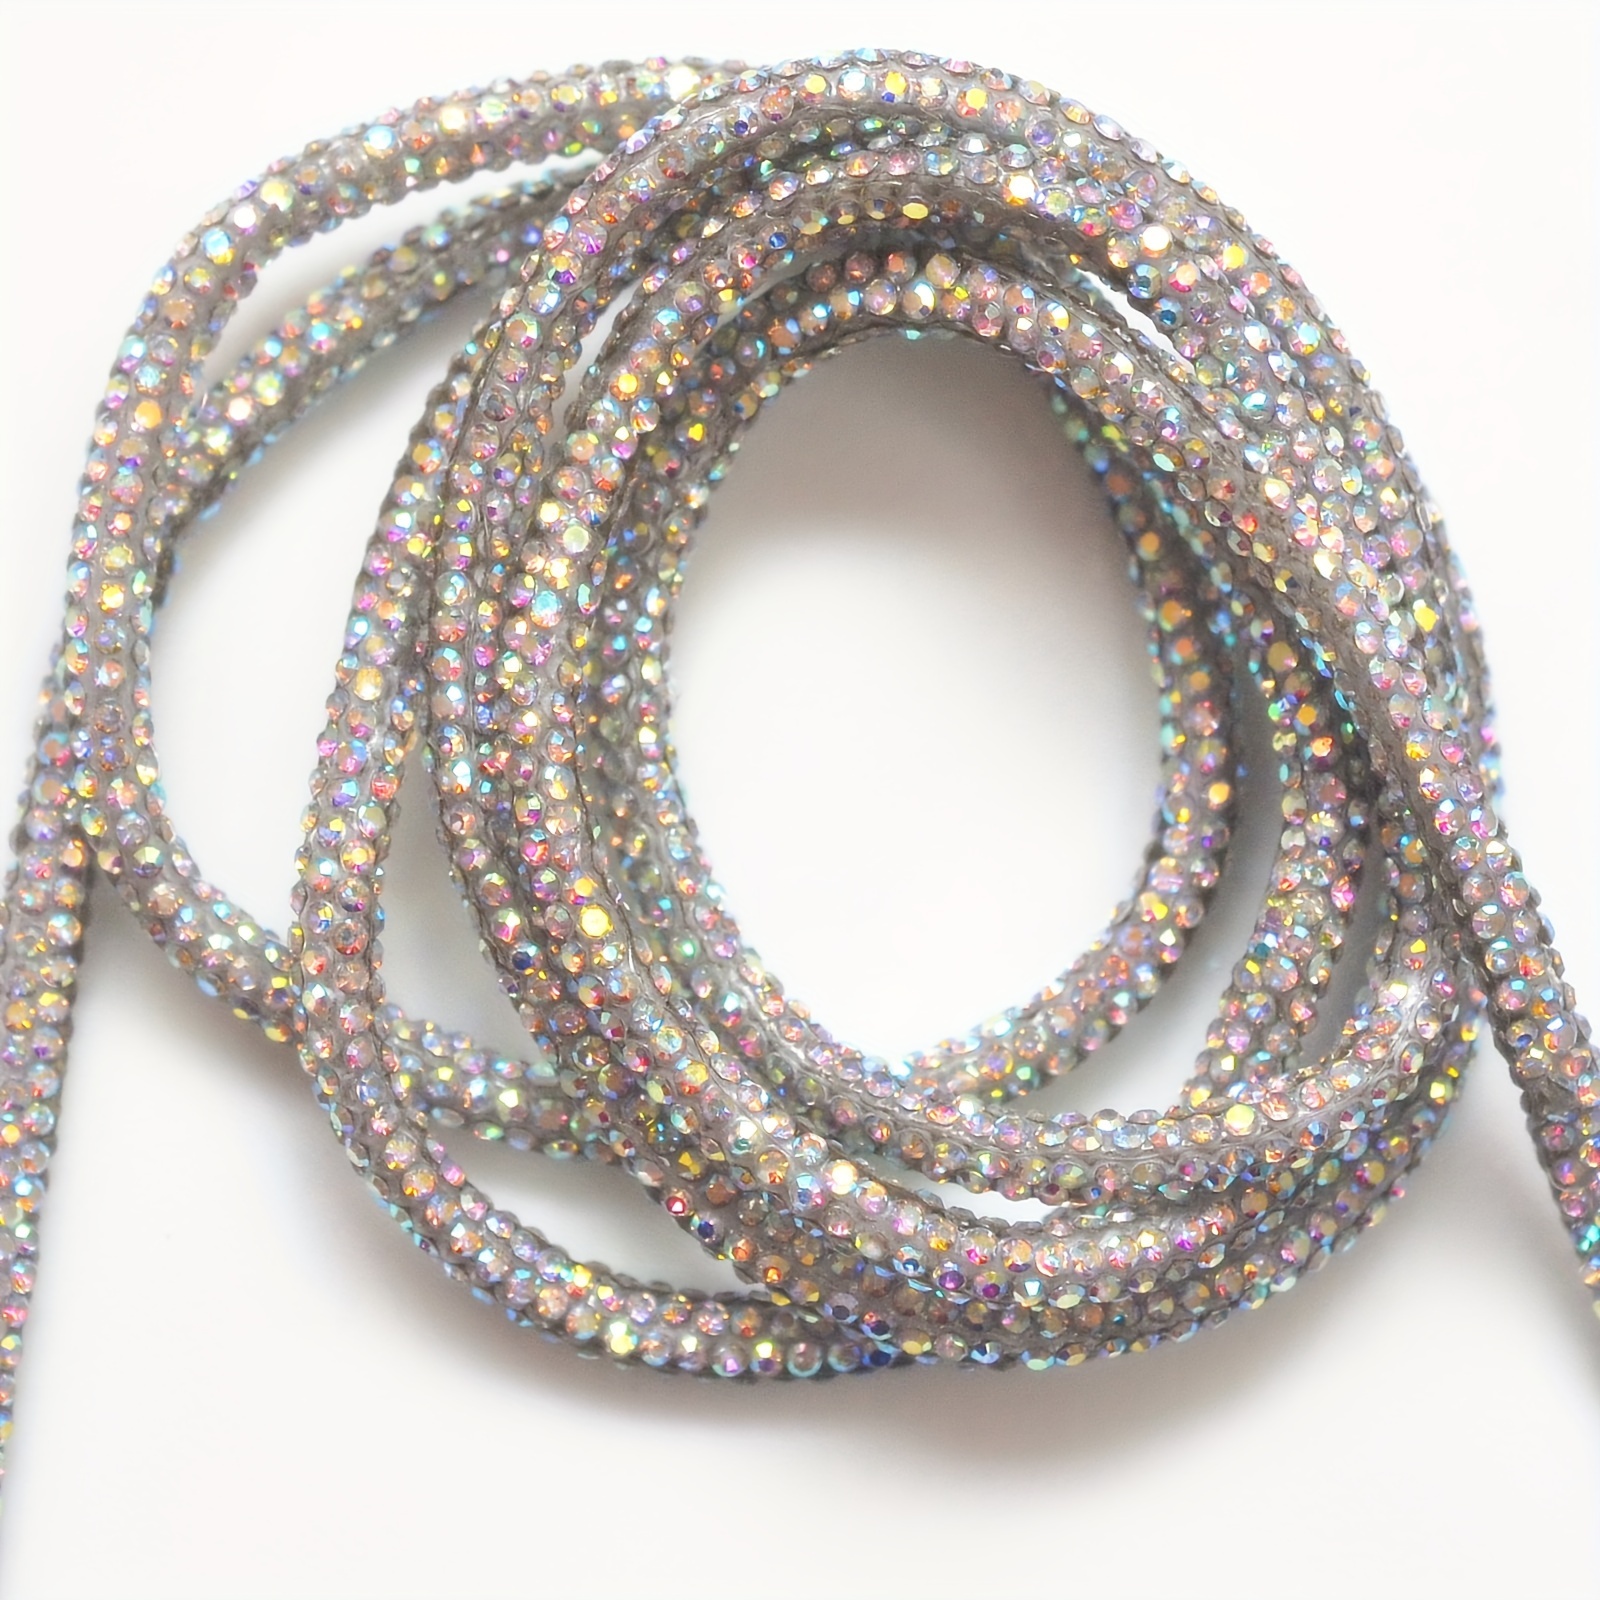 Rhinestones Tube for Crafts Bling Rhinestone Rope Glitter Cord Tube for DIY  Bows,Hairband,Shoe Laces Wedding Dress Costume Decoration Accessories